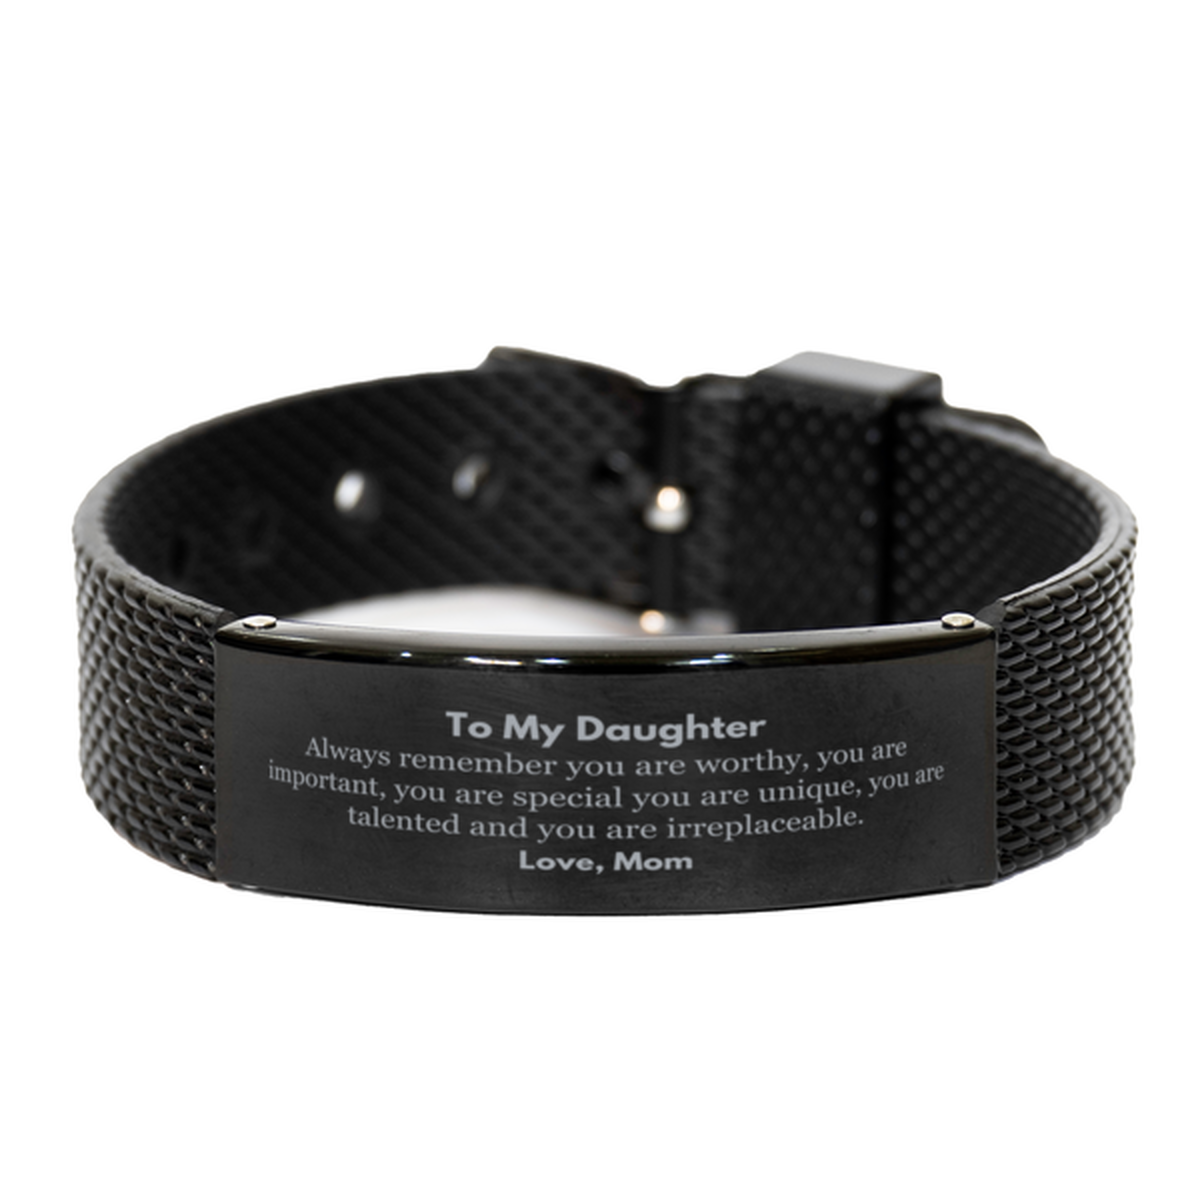 Daughter Birthday Gifts from Mom, Inspirational Black Shark Mesh Bracelet for Daughter Christmas Graduation Gifts for Daughter Always remember you are worthy, you are important. Love, Mom